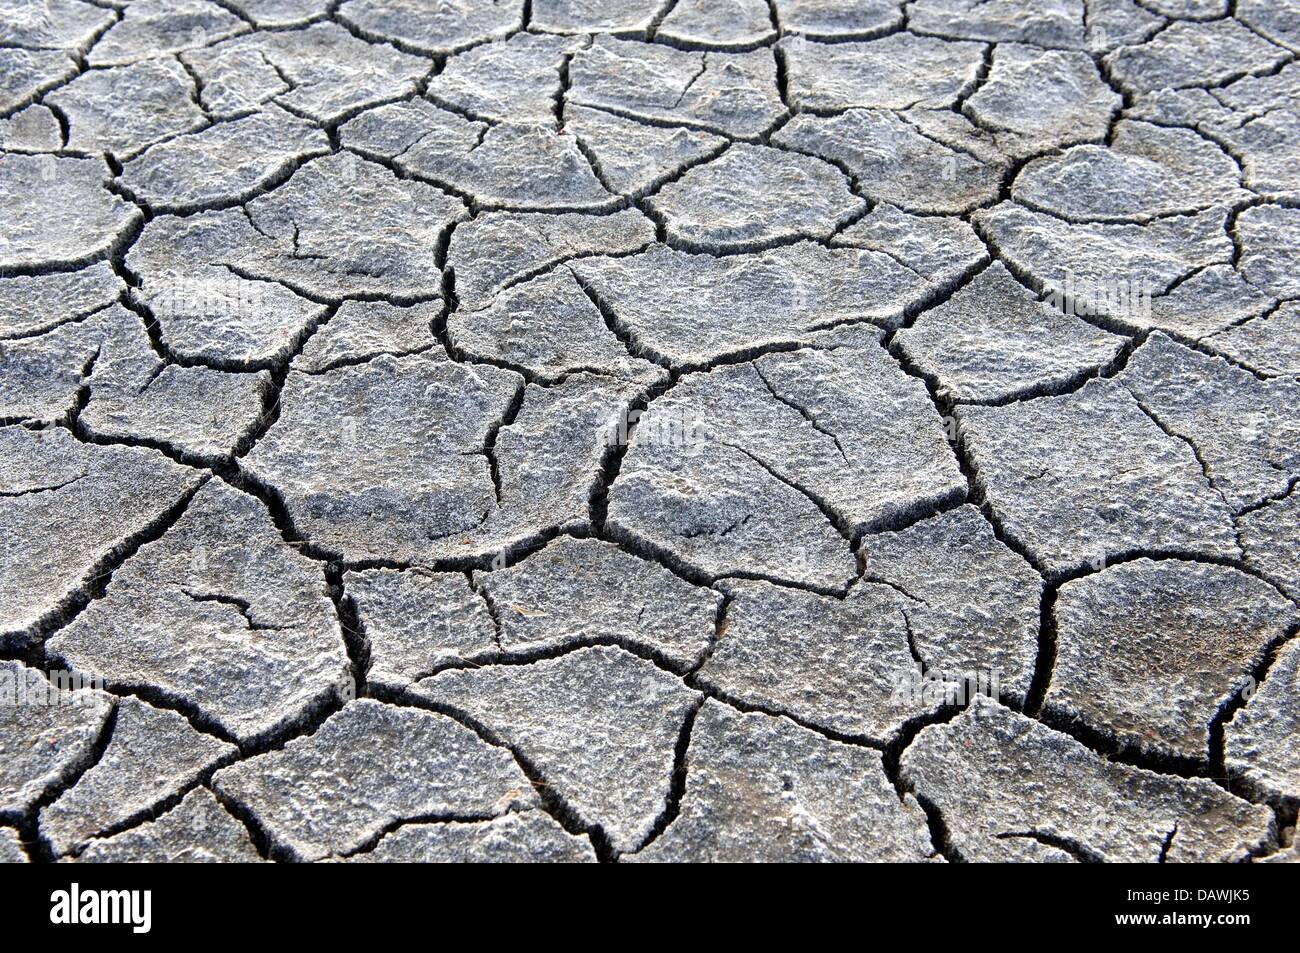 (dpa file) - Cracks have opened up in the dry soil at the banks of the German Polish frontier river Oder, Frankfurt Oder, Germany, 30 June 2005. Missing rains have caused a sharp decline of the Oder water levels. The Intergovernmental Panel on Climate Change of the United Nations published the third chapter of its Climate Report in Bangkok on 04 May 2007. It is dedicated to possibl Stock Photo